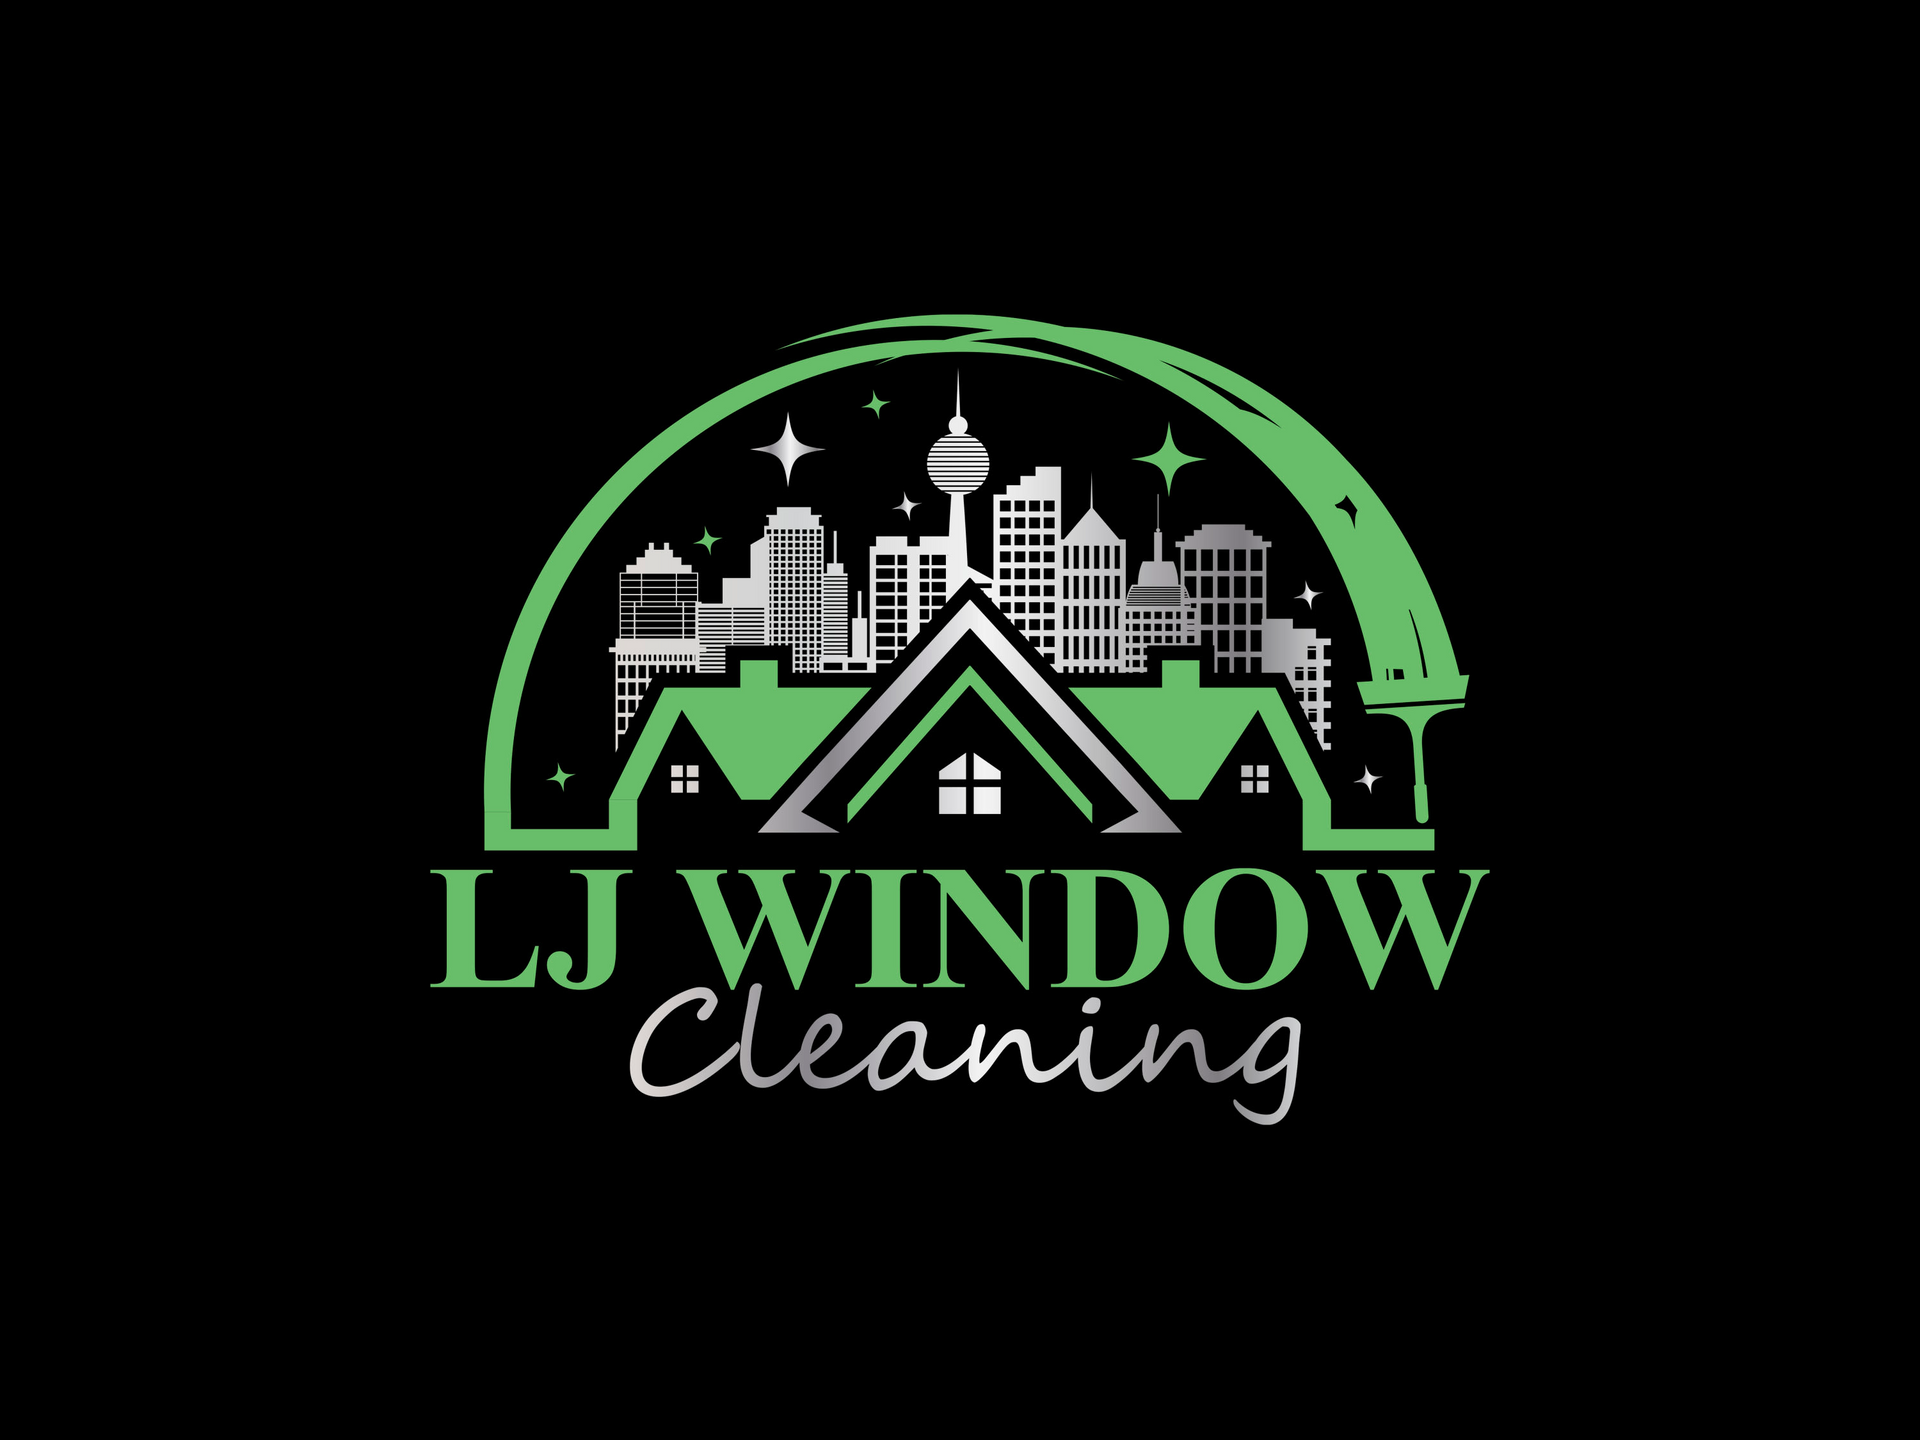 A logo for lj window cleaning with a city skyline in the background.